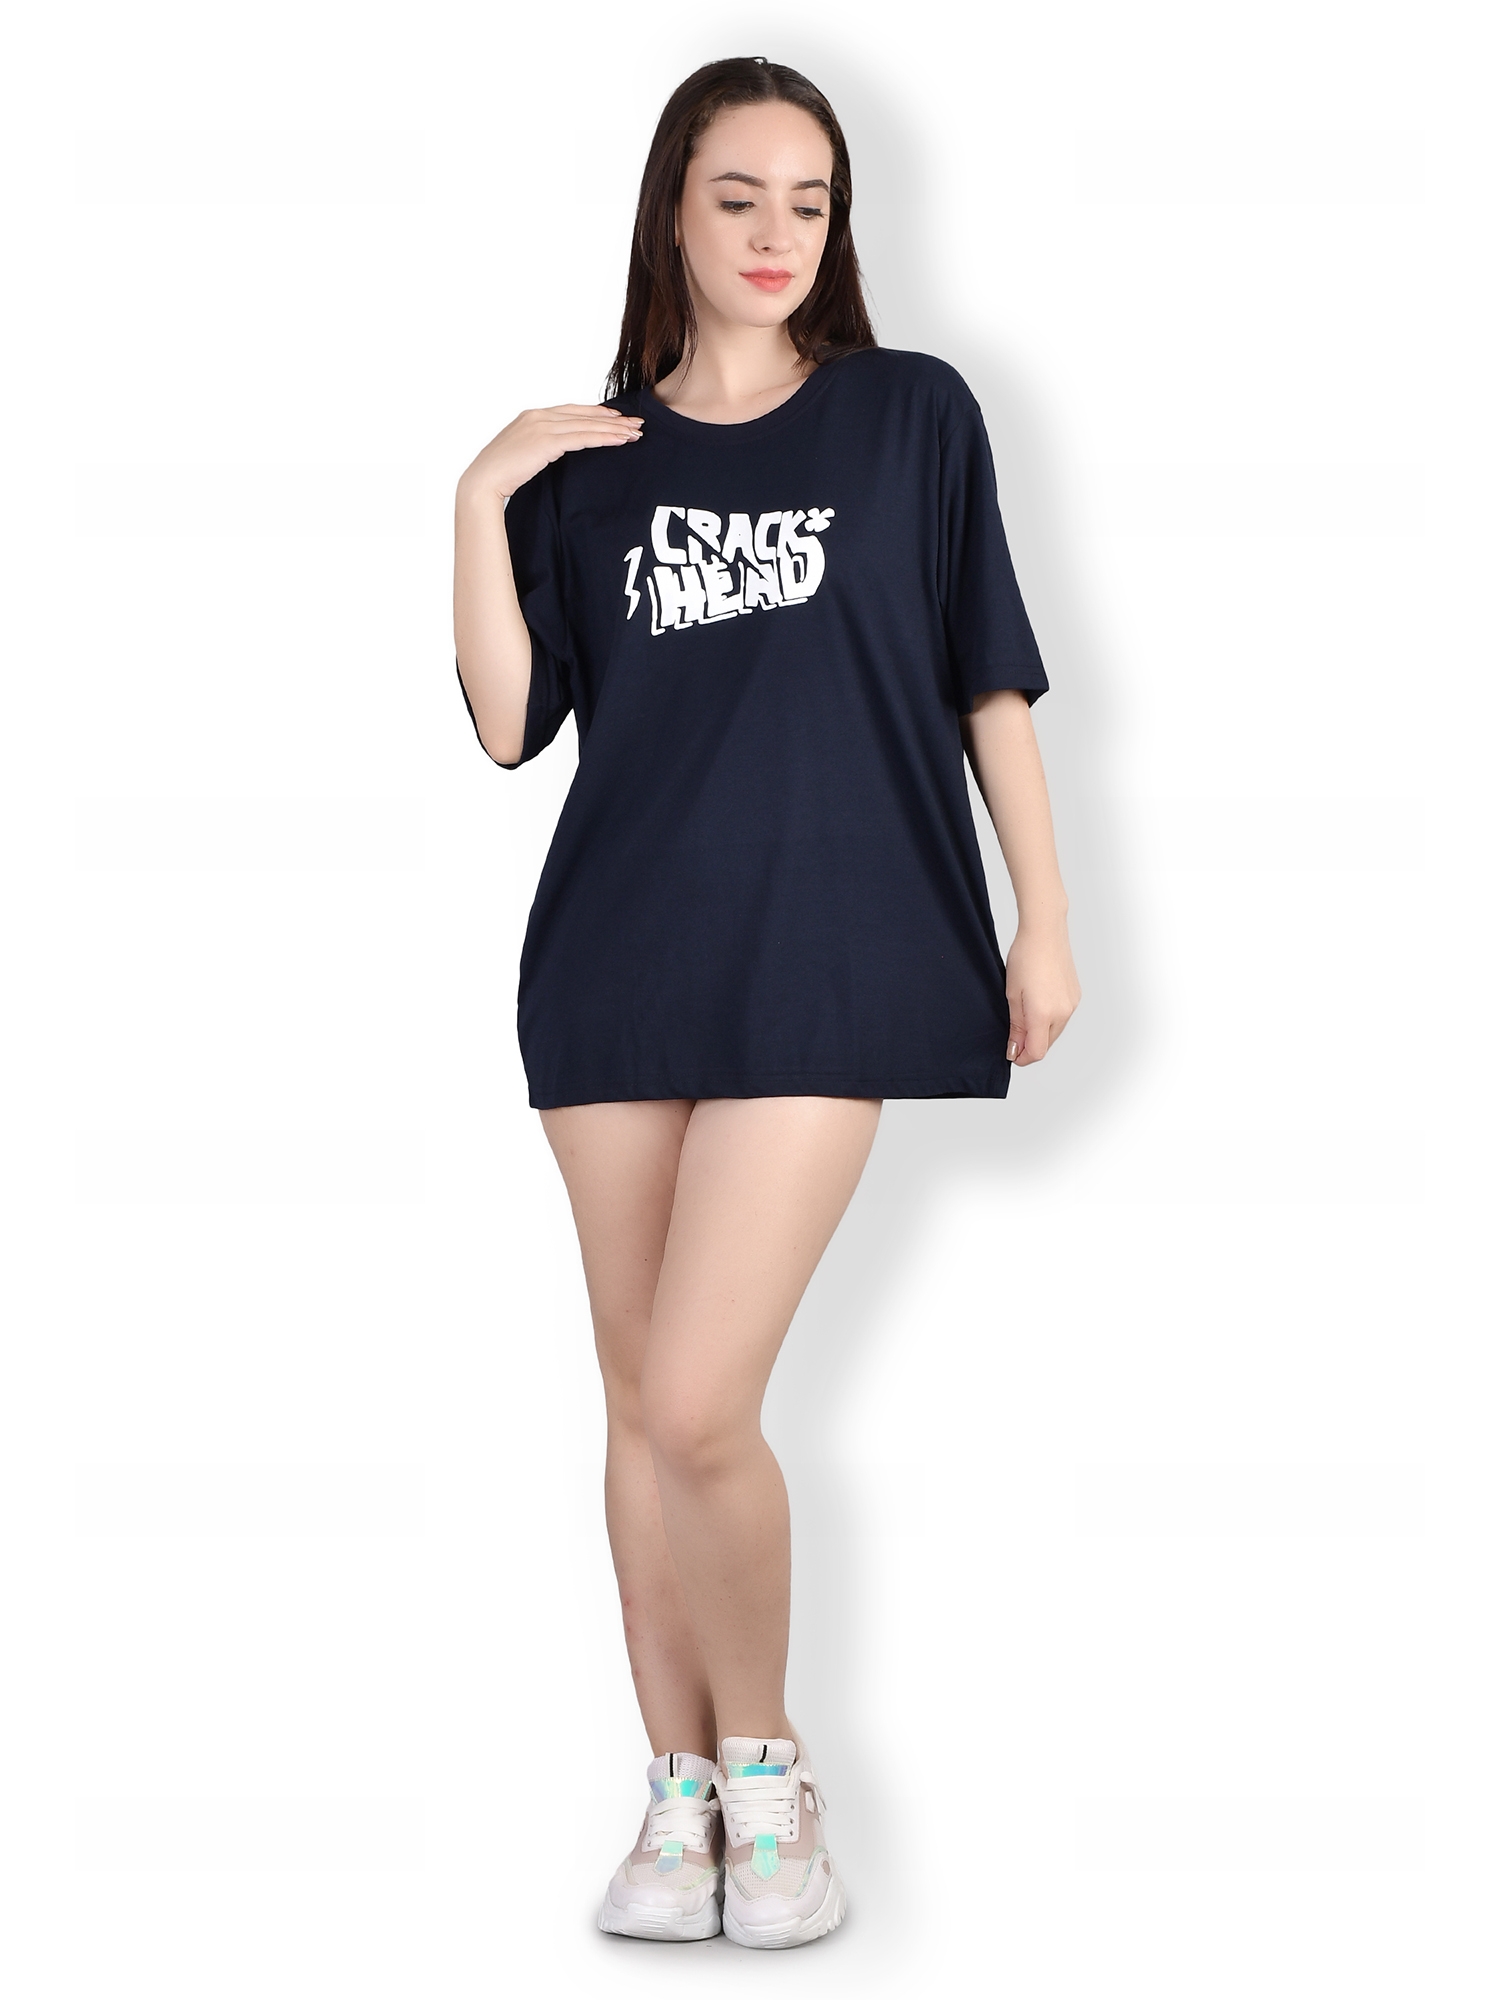 Creak Head : Quirky Printed Oversized Women's Tees In Blue Color